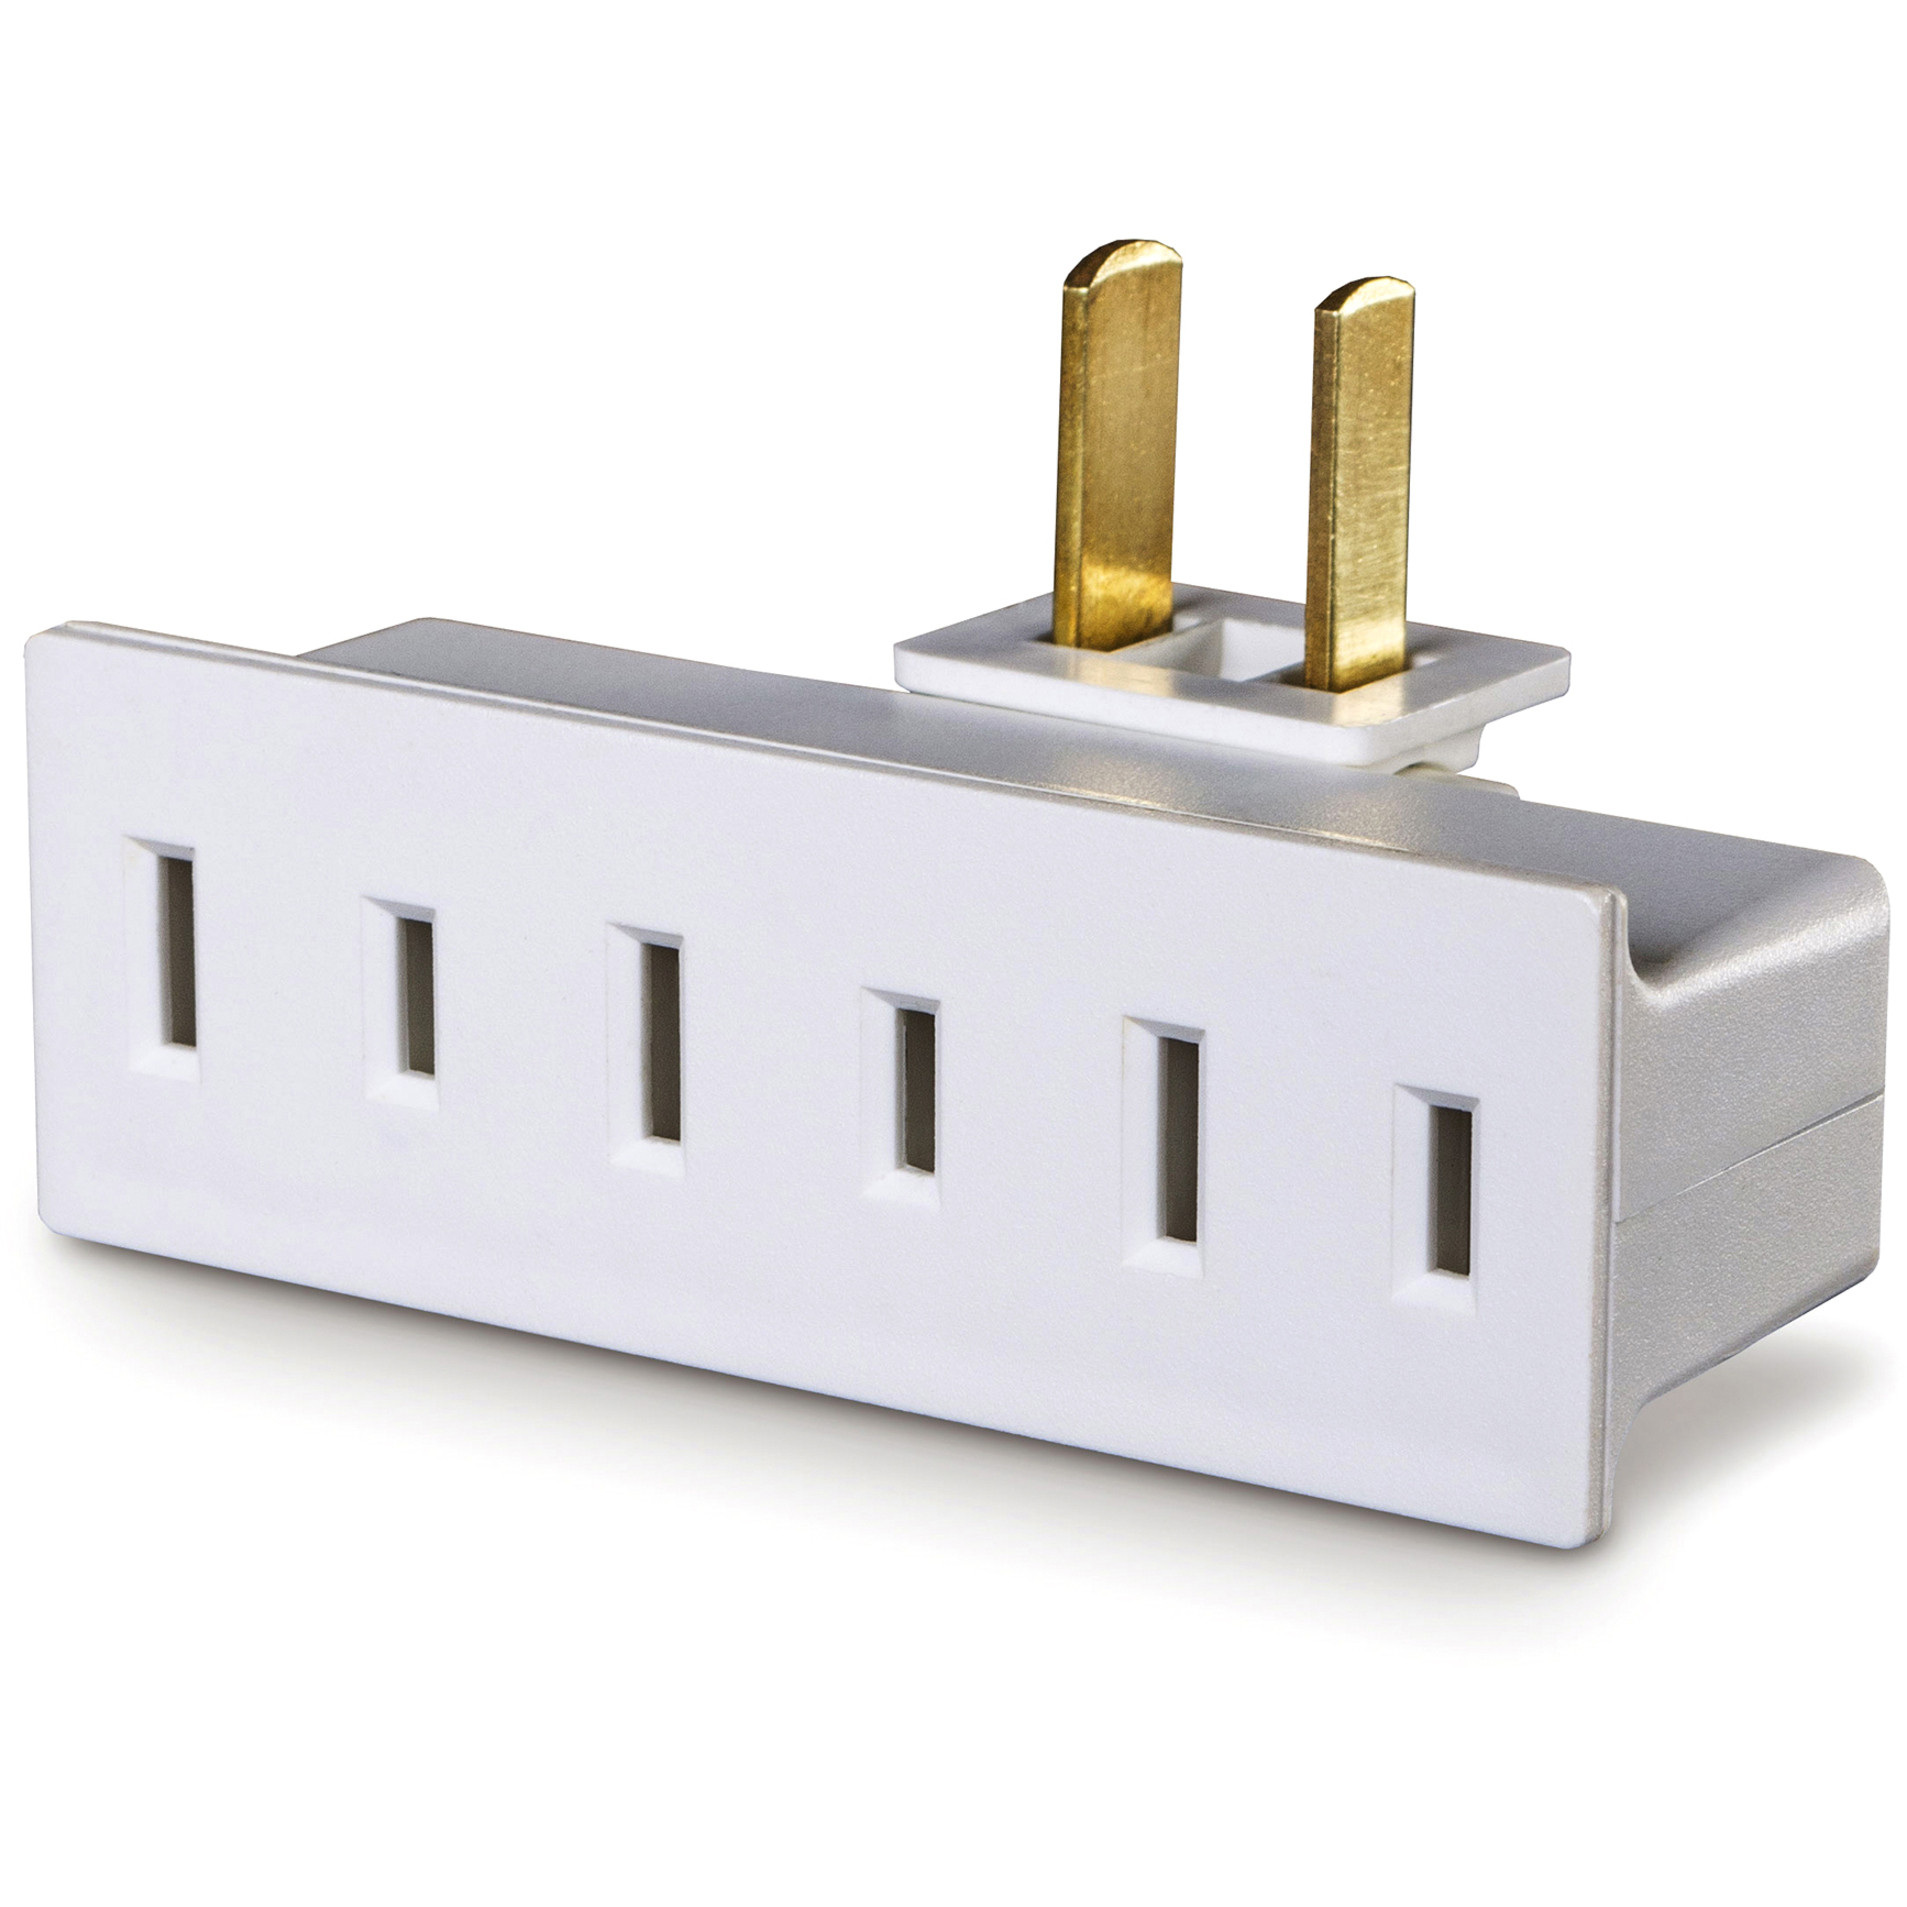 Cyber Power GT300P Straight Outlet AdapterNEMA 1-15R Outlet, NEMA 1-15P Plug Type, Straight Plug Style, White GT300P